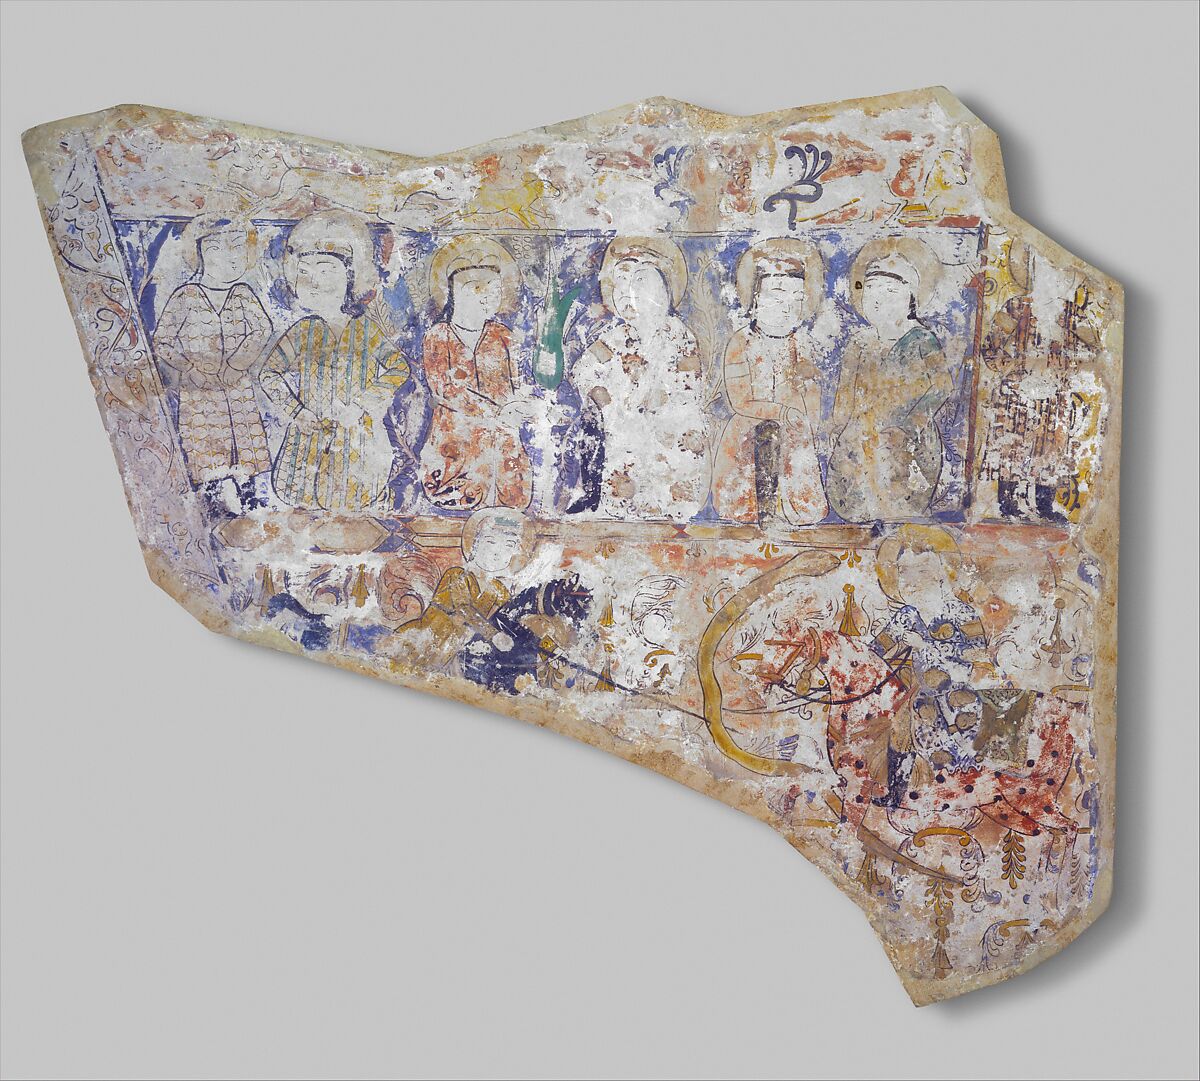 Fragment of Wall Painting with a Scene of Two Horsemen Slaying a Serpent, Gypsum plaster; painted